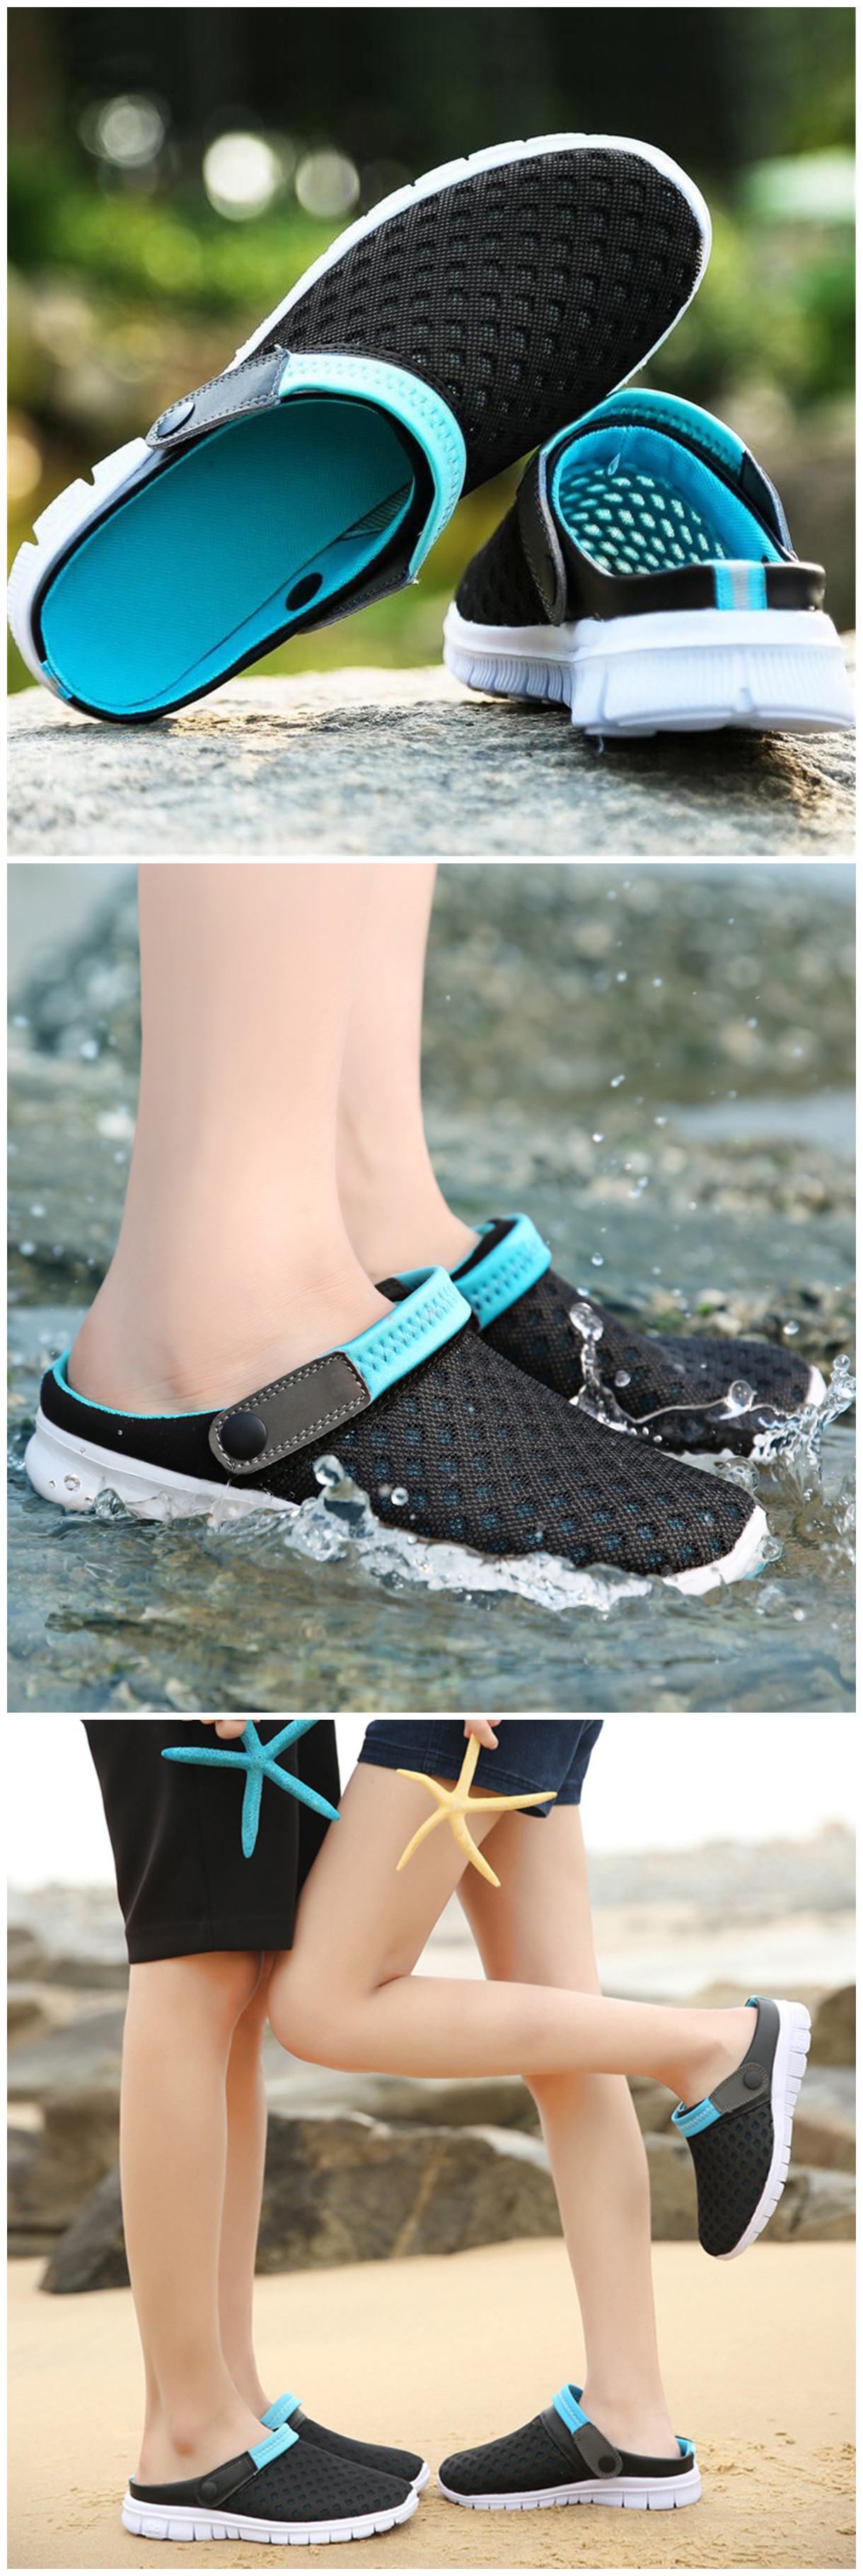 IPReetrade-Plus-Size-Outdoor-Mesh-Slippers-Breathable-Sandals-Summer-Beach-Casual-Lazy-Shoes-1147137